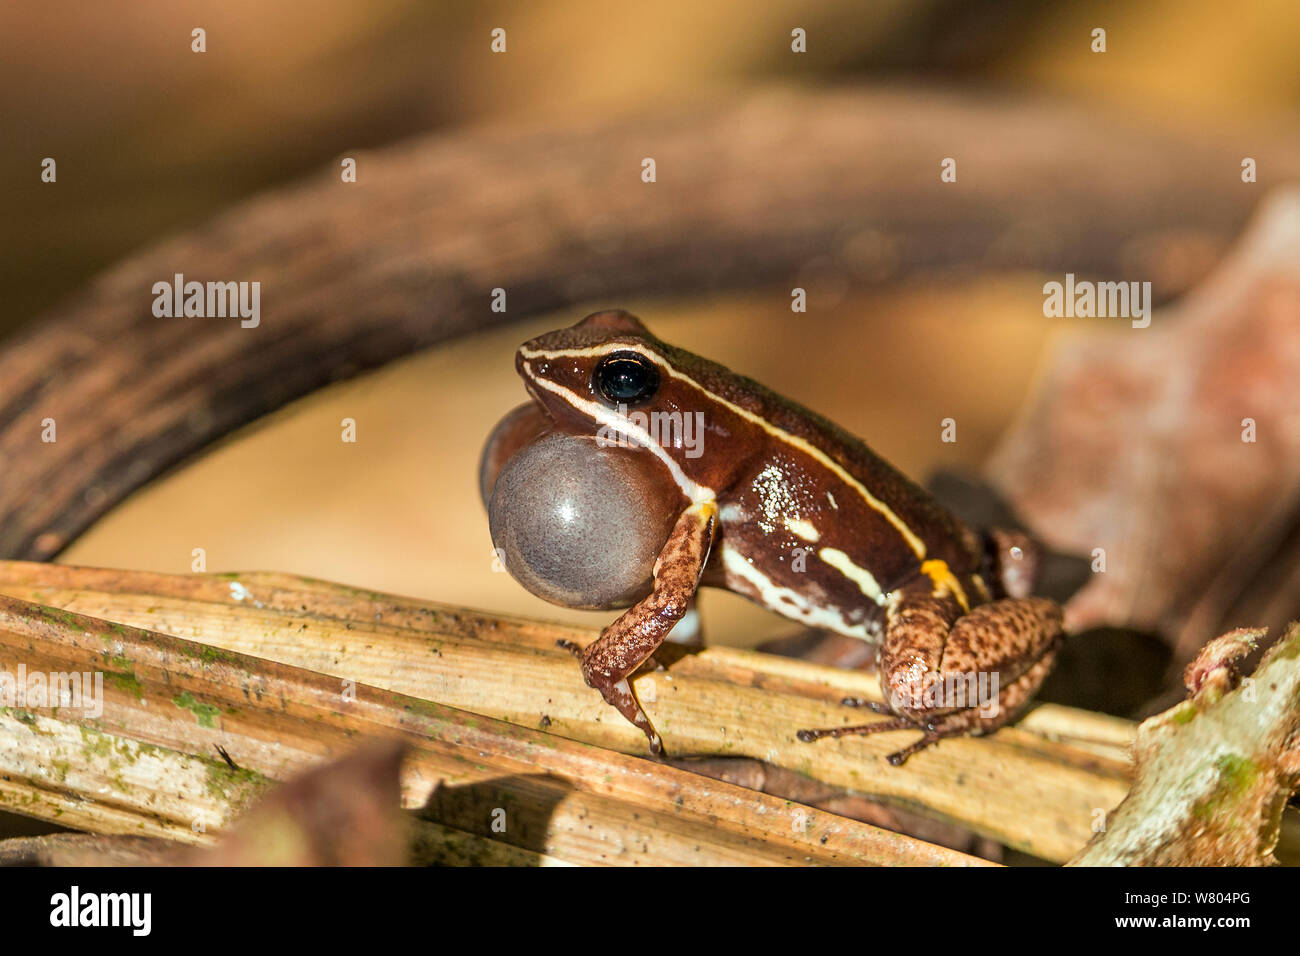 Brilliant-thighed poison frog (Allobates femoralis) calling with vocal sac inflated. Panguana Reserve, Huanuco province, Amazon basin, Peru. Stock Photo